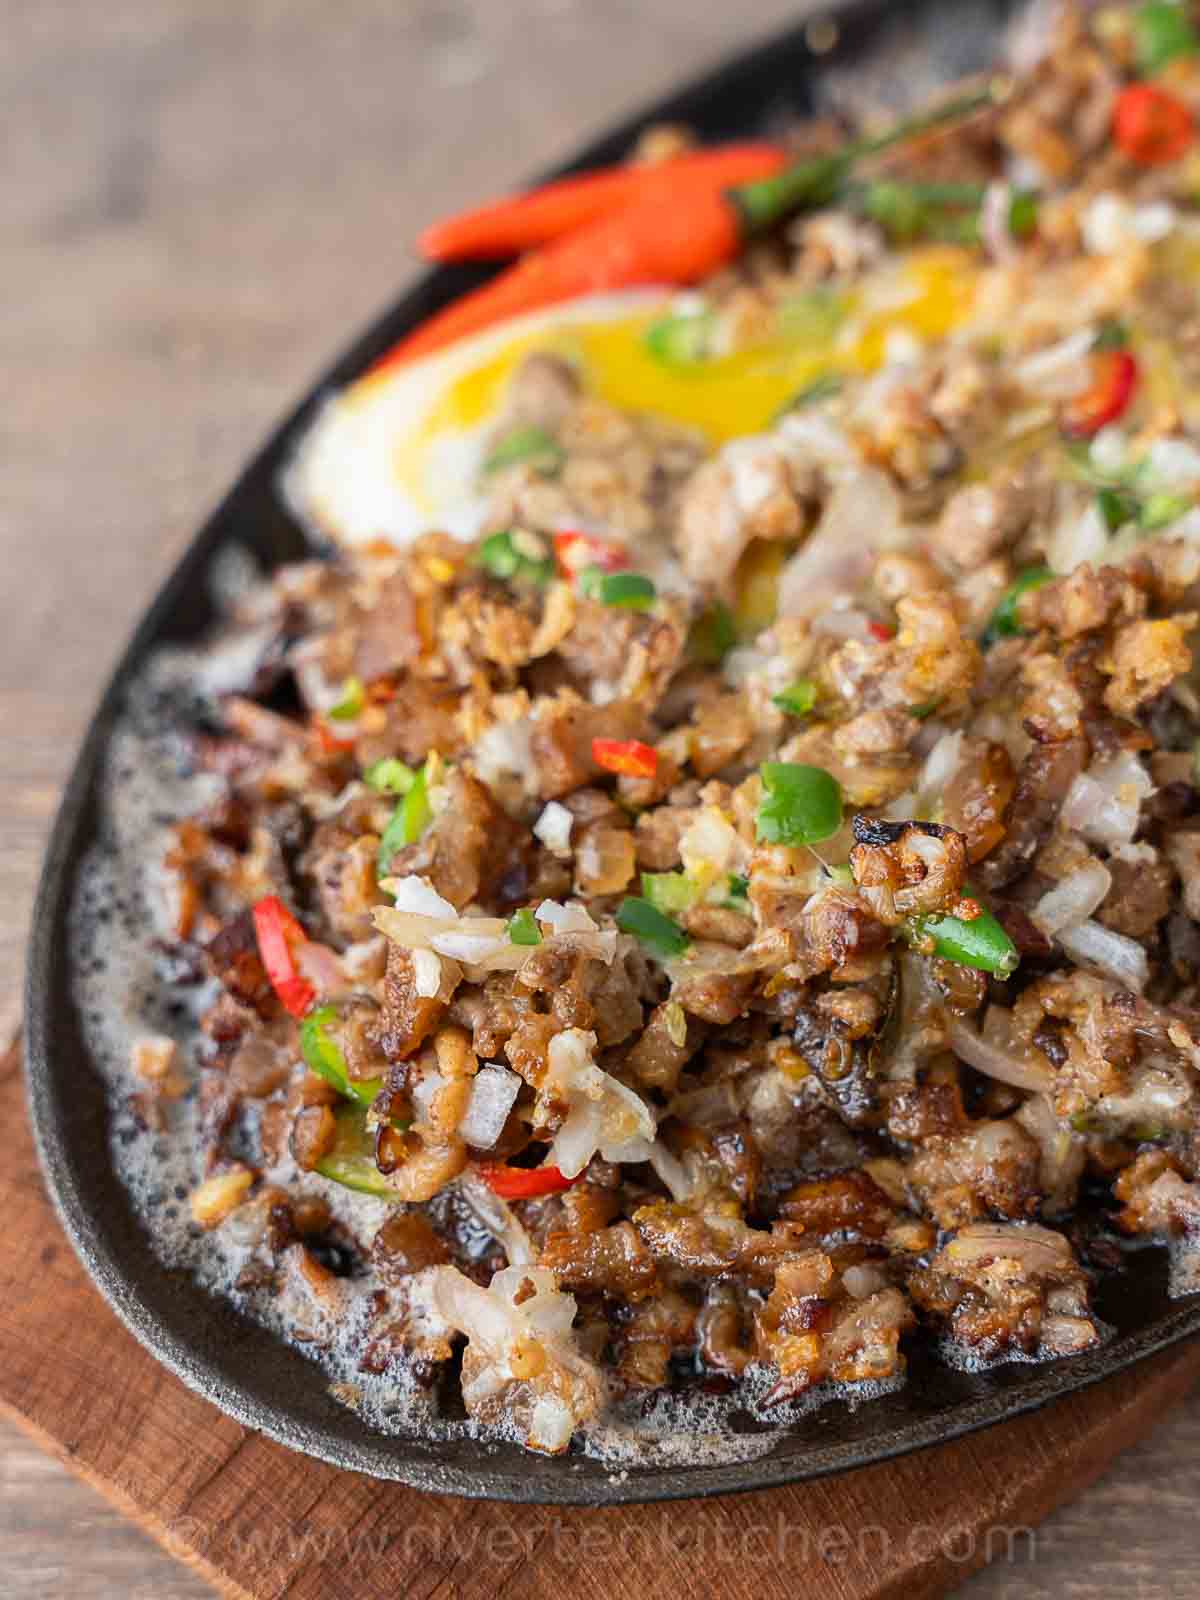 Filipino pork dish called sisig made of pork belly, onions, chilies served on a sizzling plate. Drizzled with calamansi/